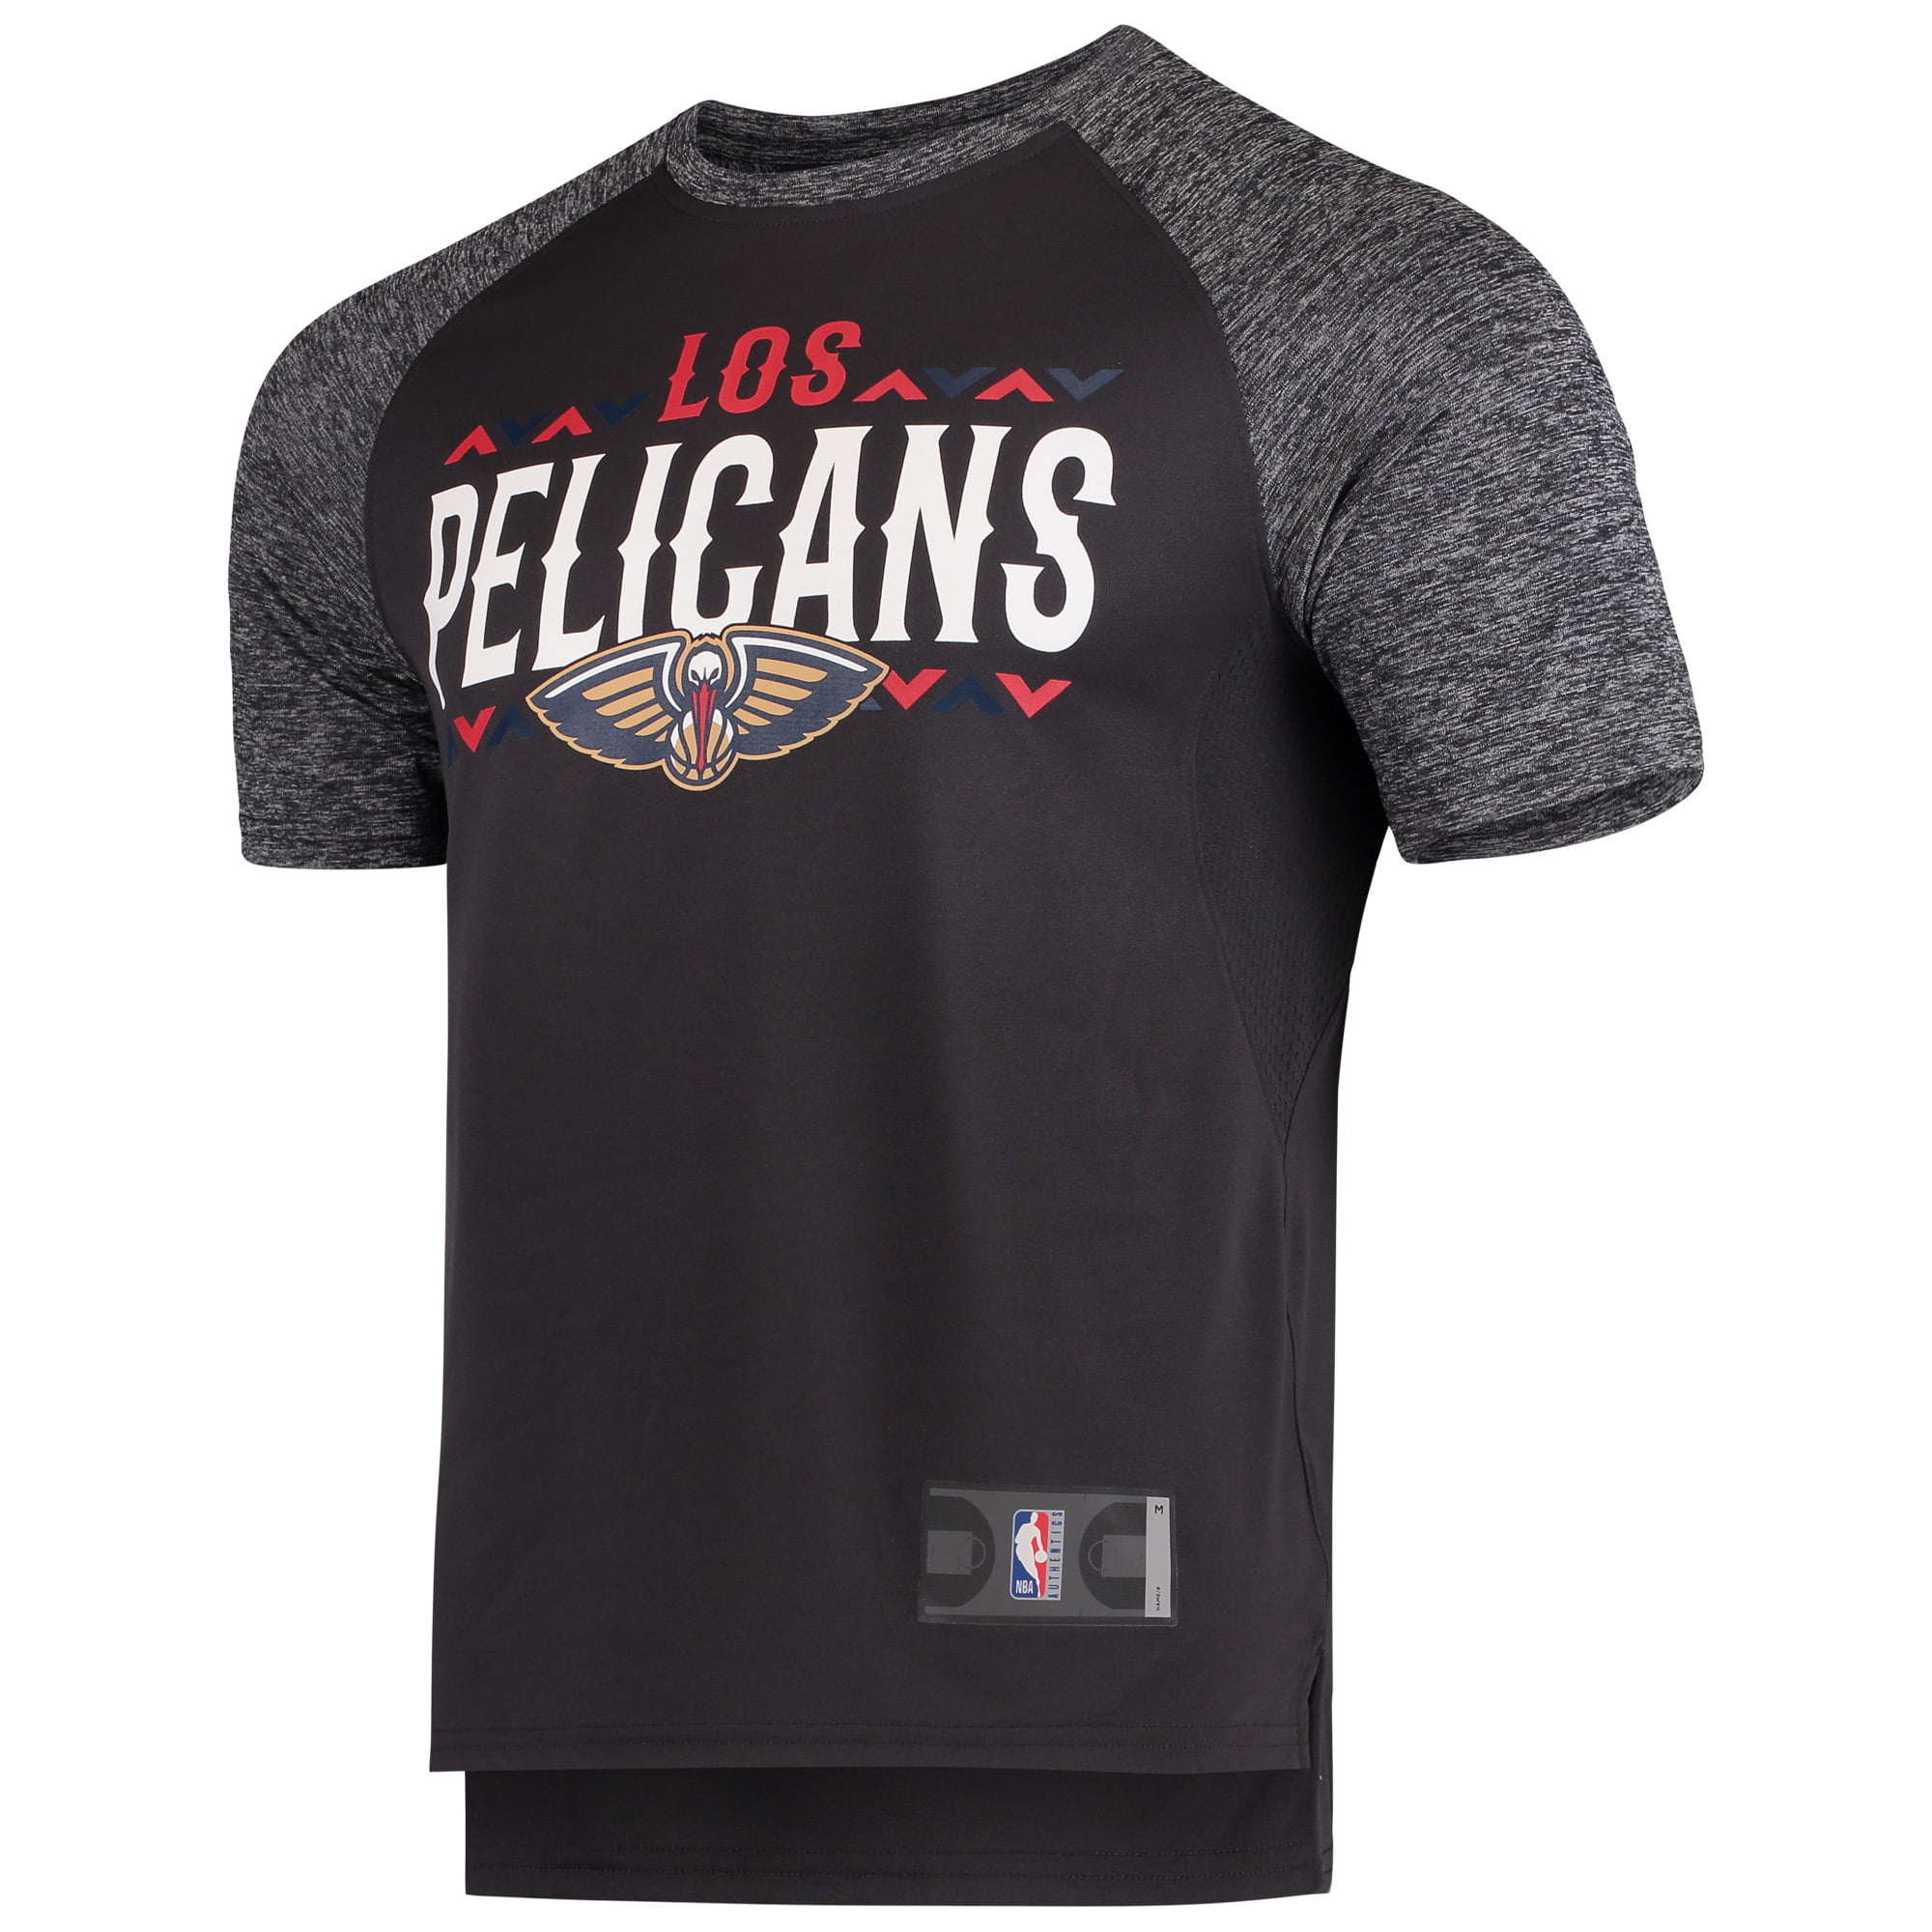 new orleans pelicans shooting shirt